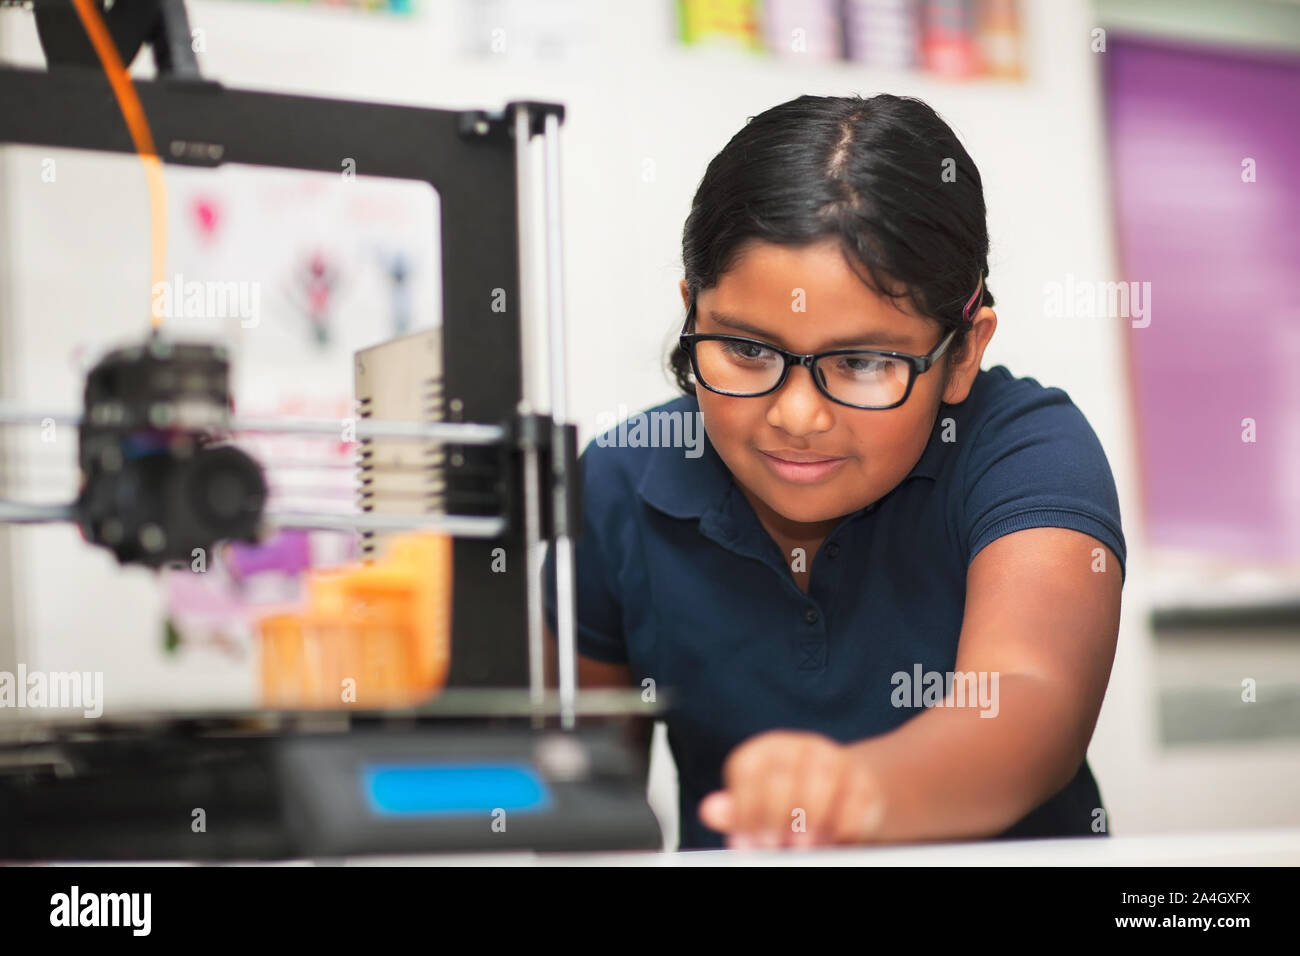 A female student in a modern classroom observing the printing process of a 3d model. Stock Photo